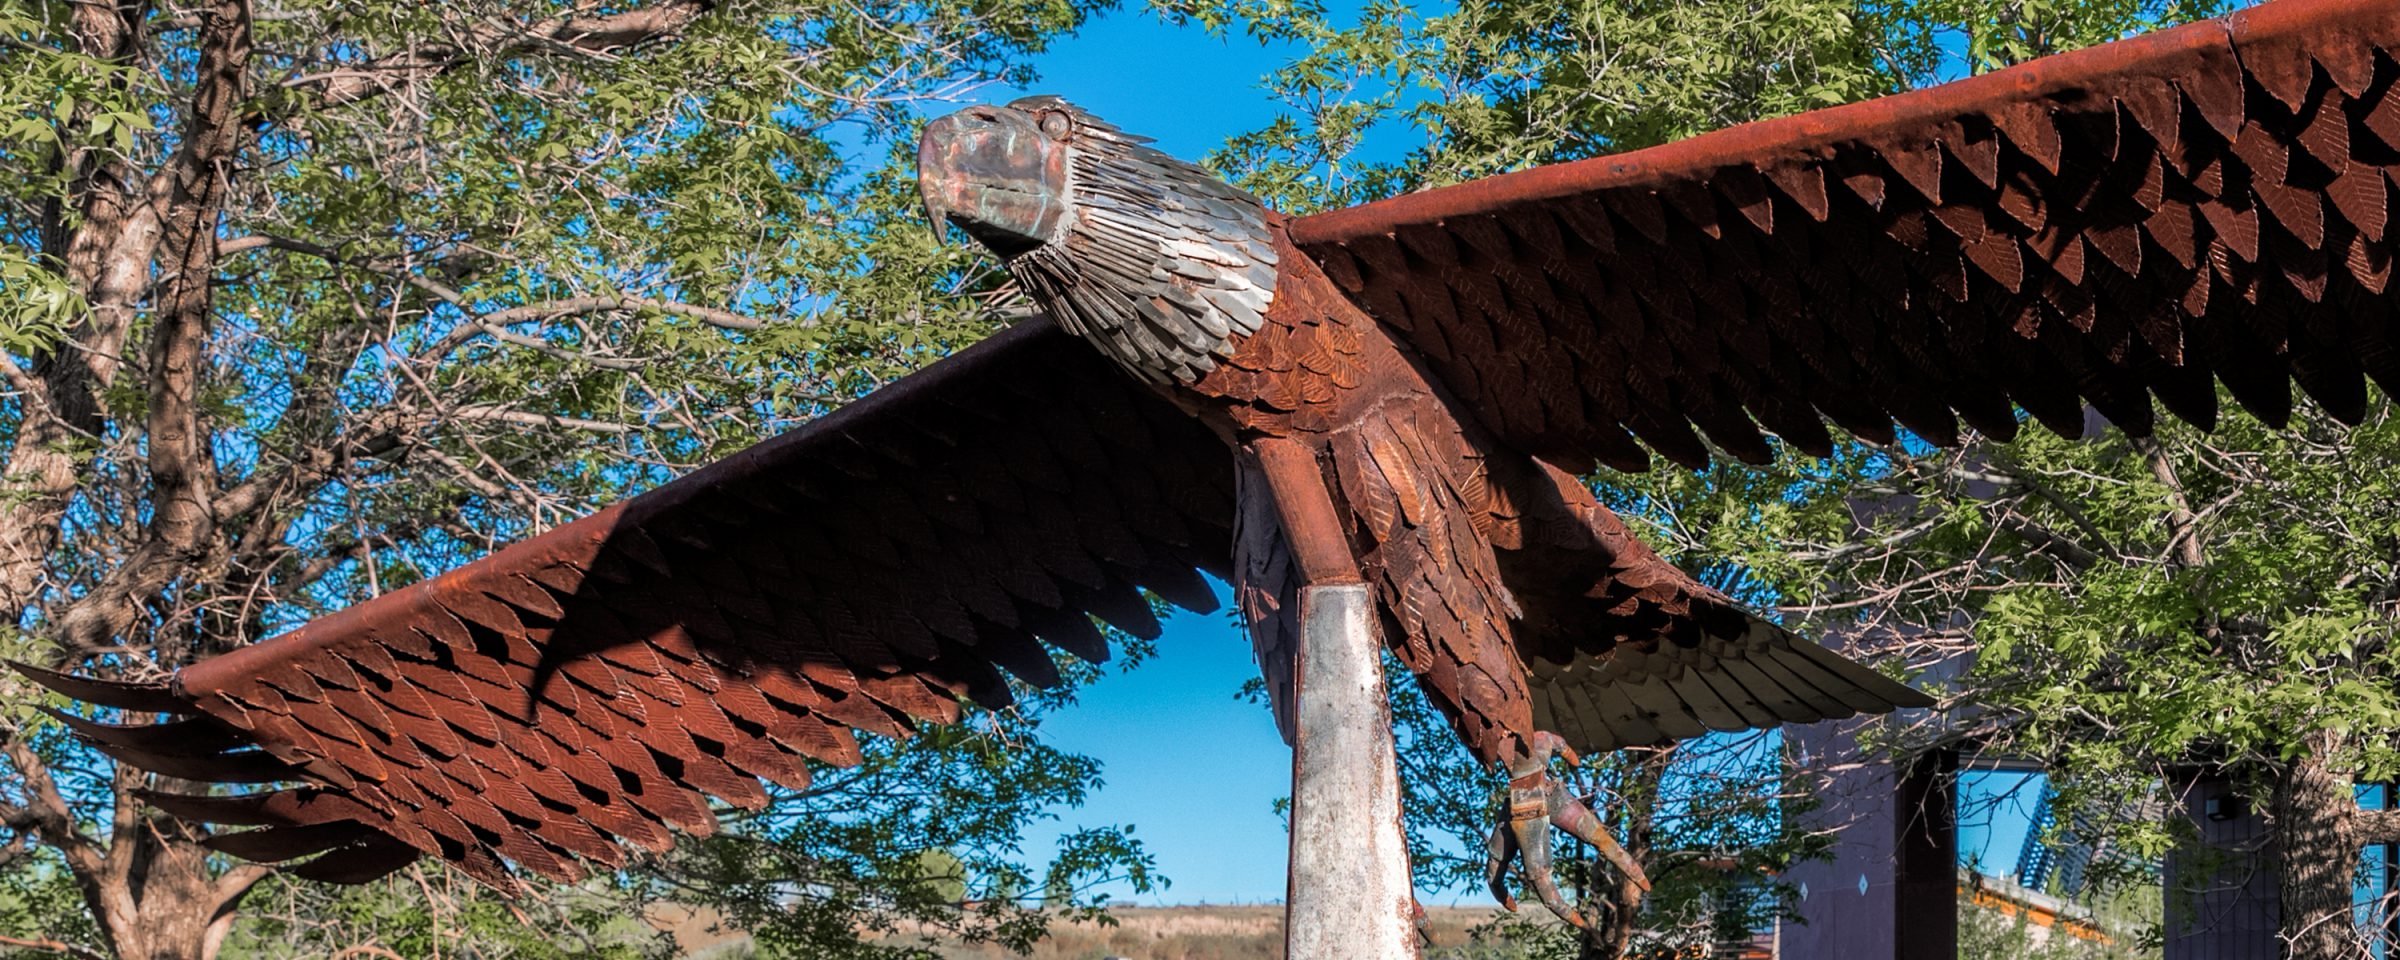 image of eagle sculpture with trees